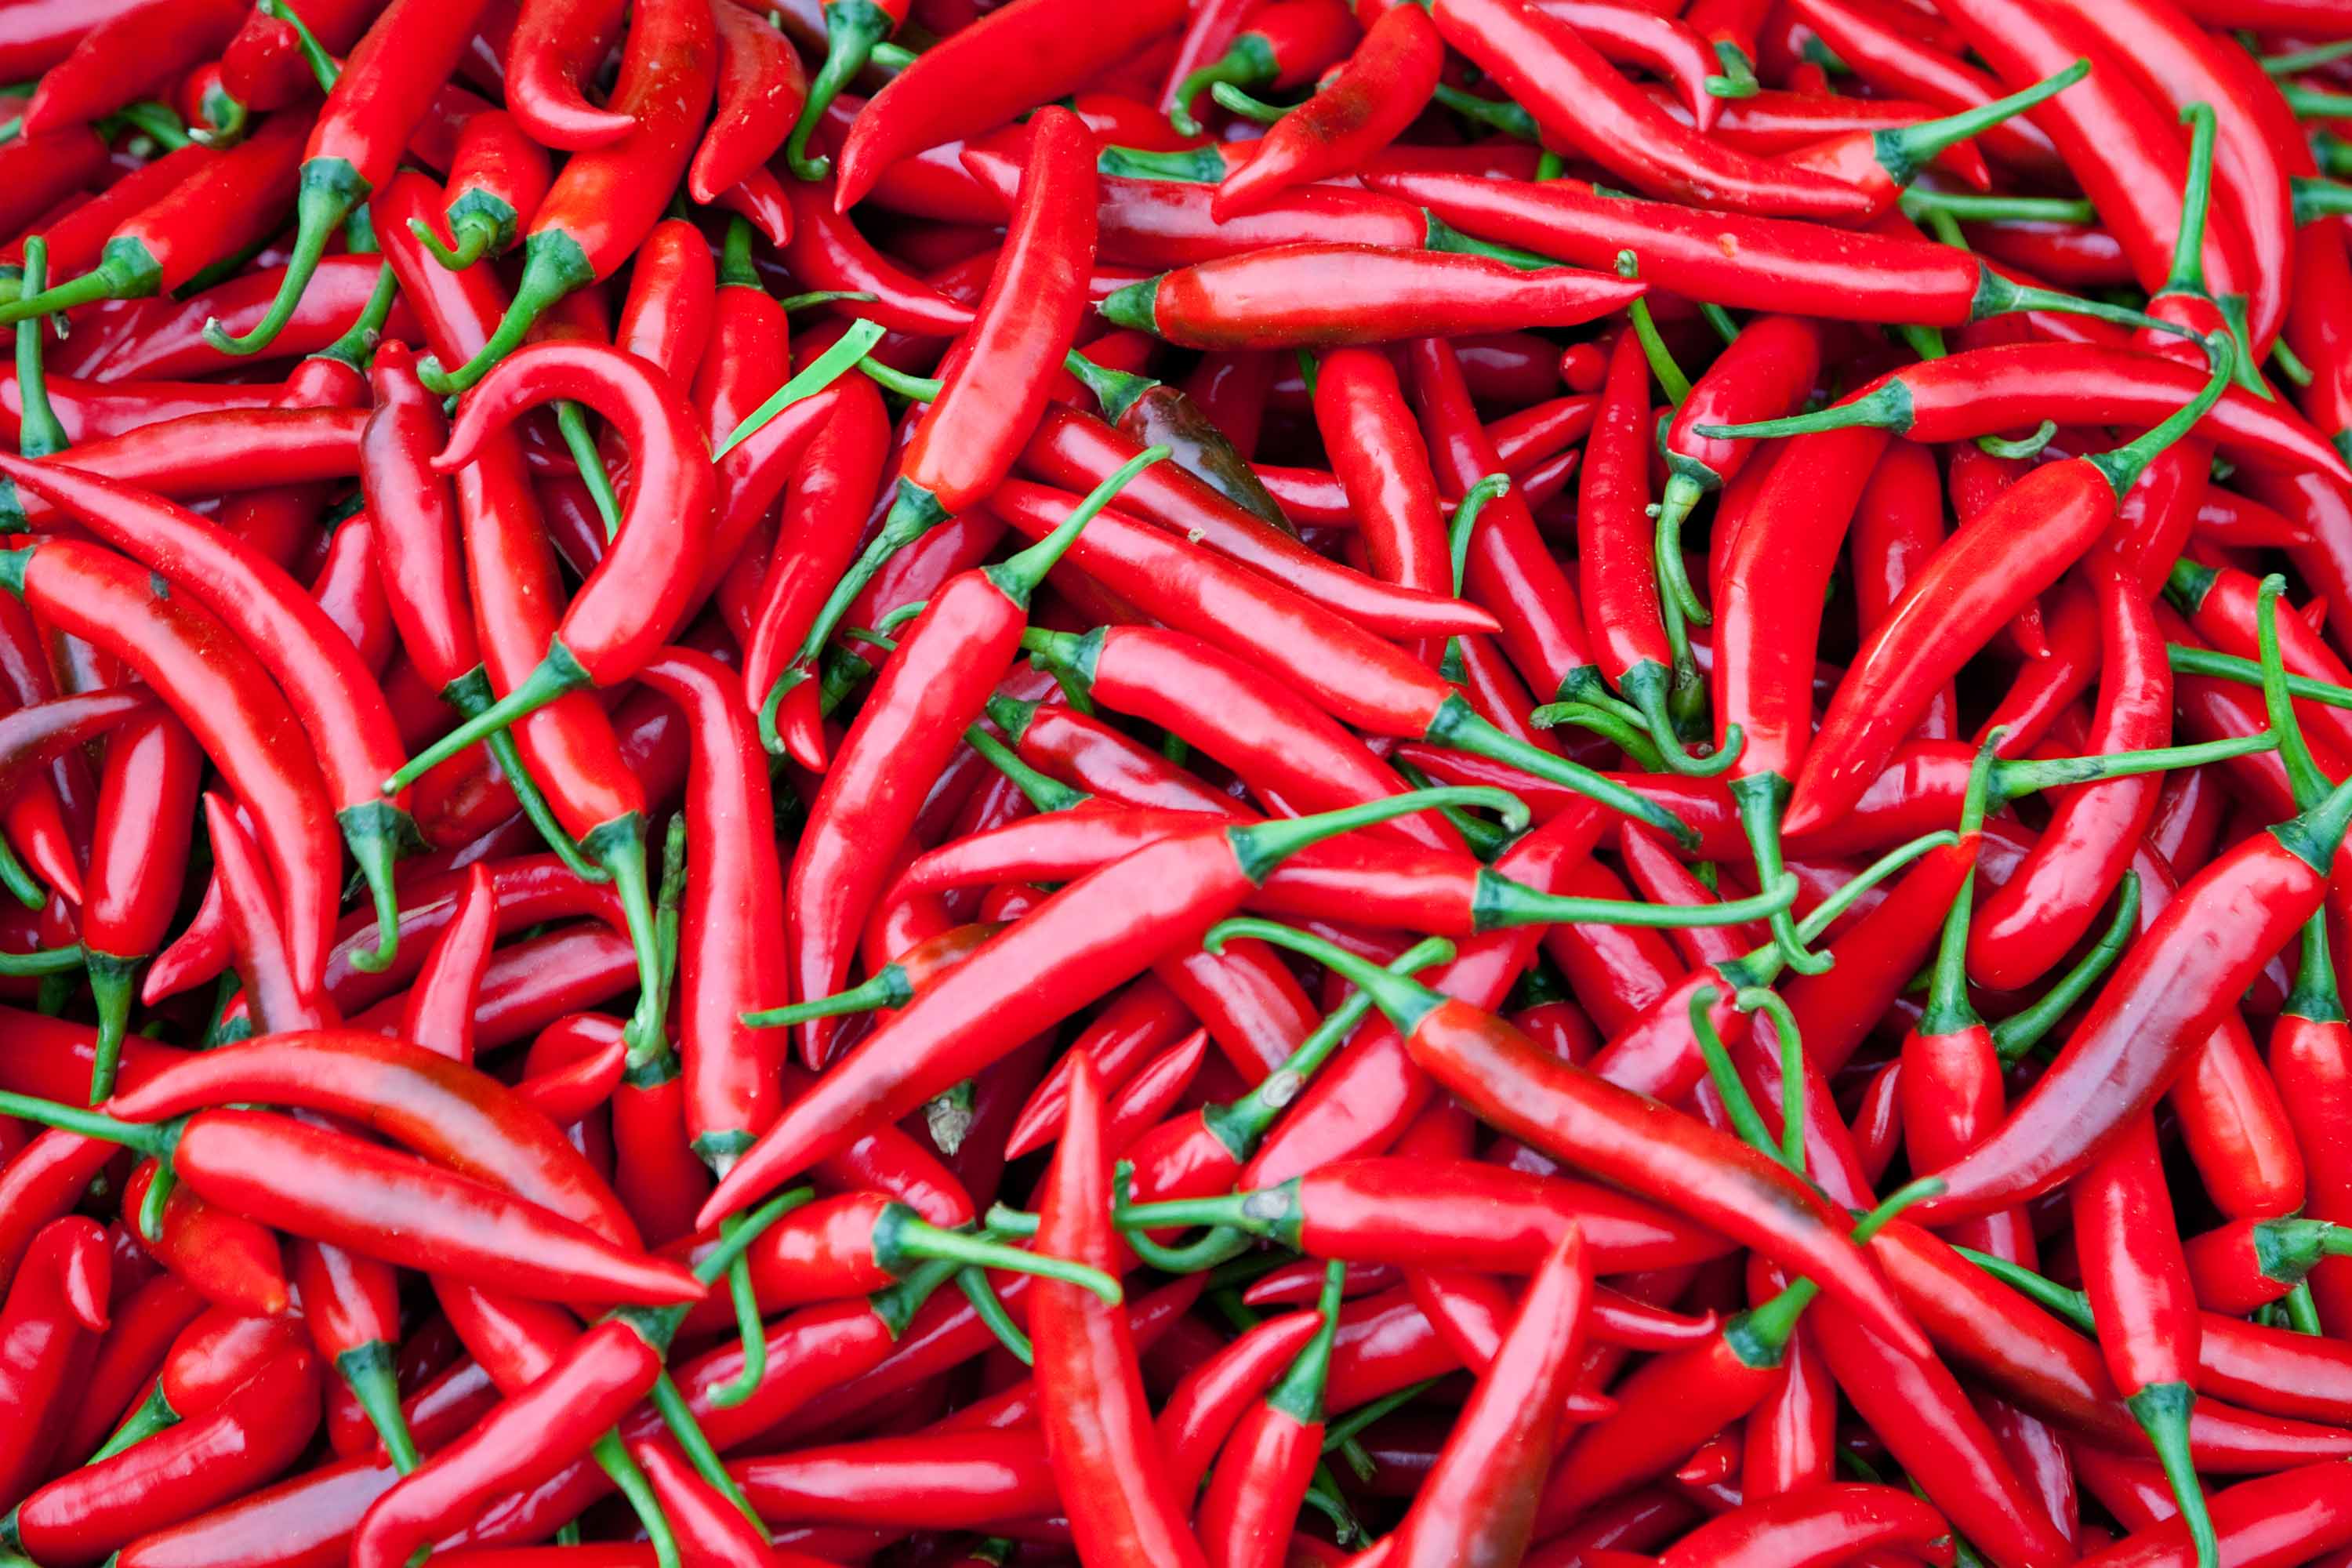 chilies cuts of from heart attack and stroke CNN